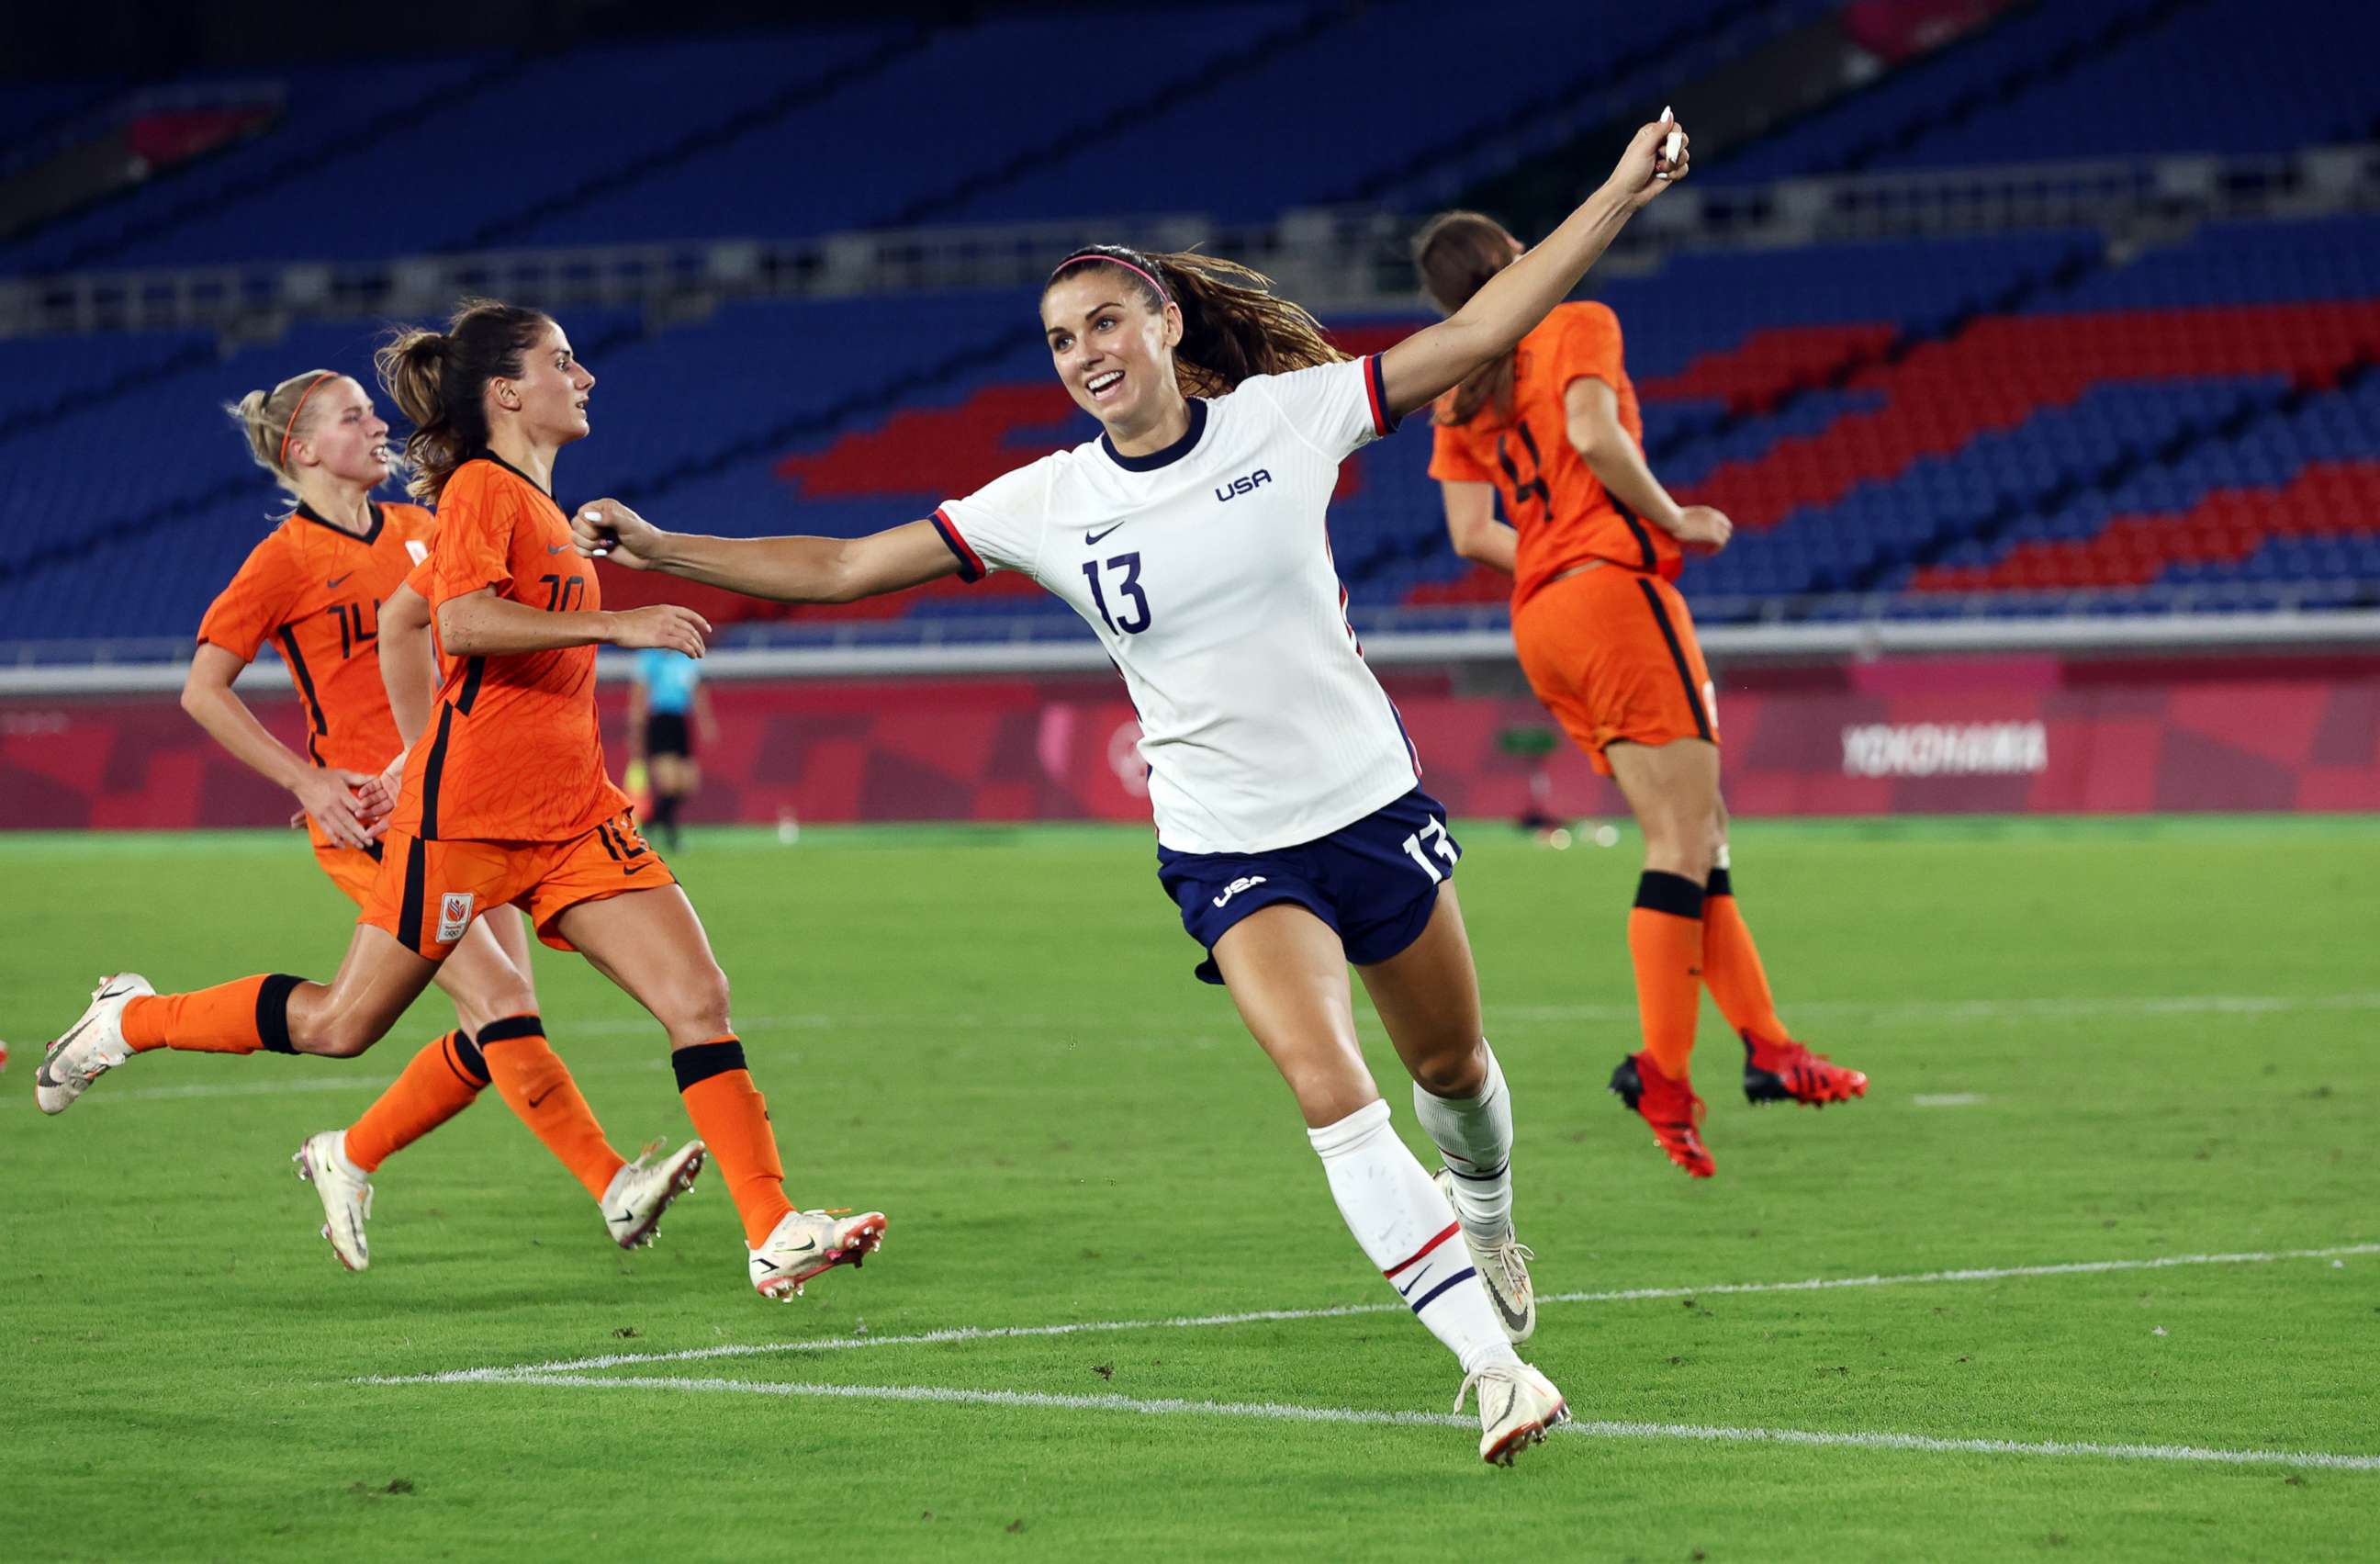 PHOTO: Alex Morgan of the United States celebrates scoring a goal before it is disallowed, during a quarterfinal match against the Netherlands, July 30, 2021, at the Tokyo Olympics, in Yokohama, Japan.